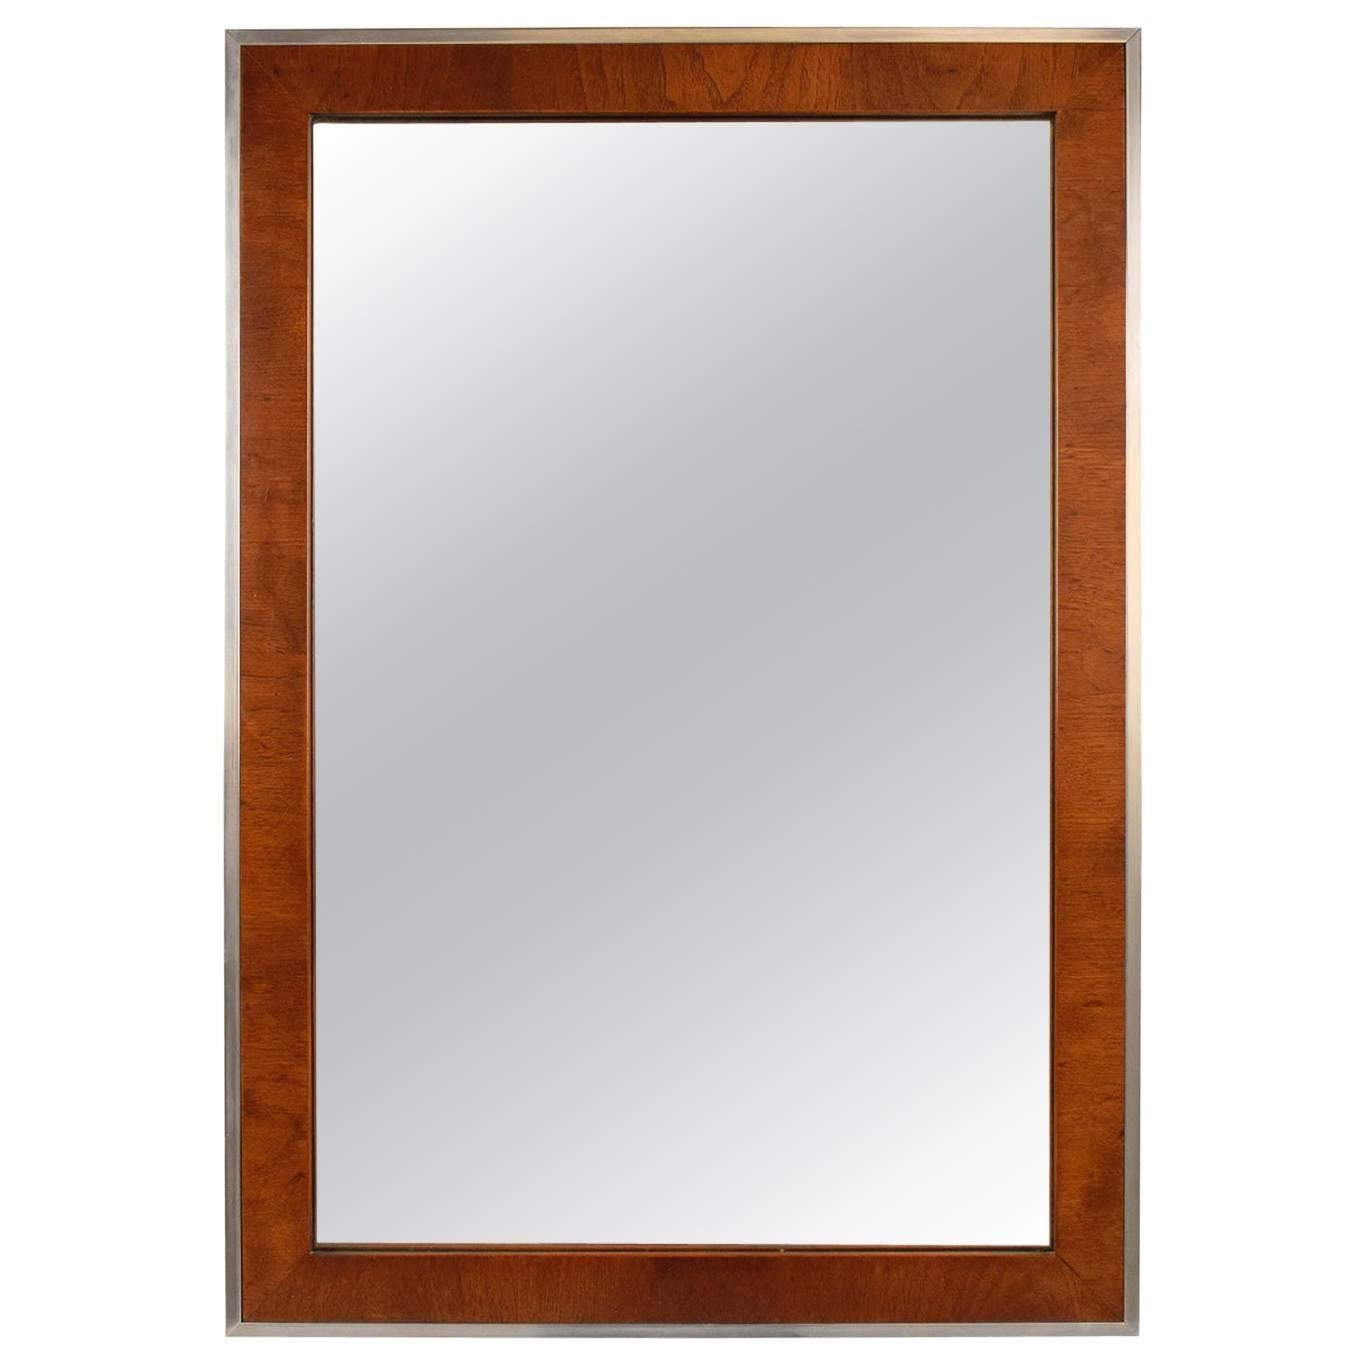 Modernist Wood and Chrome Wall Mirror